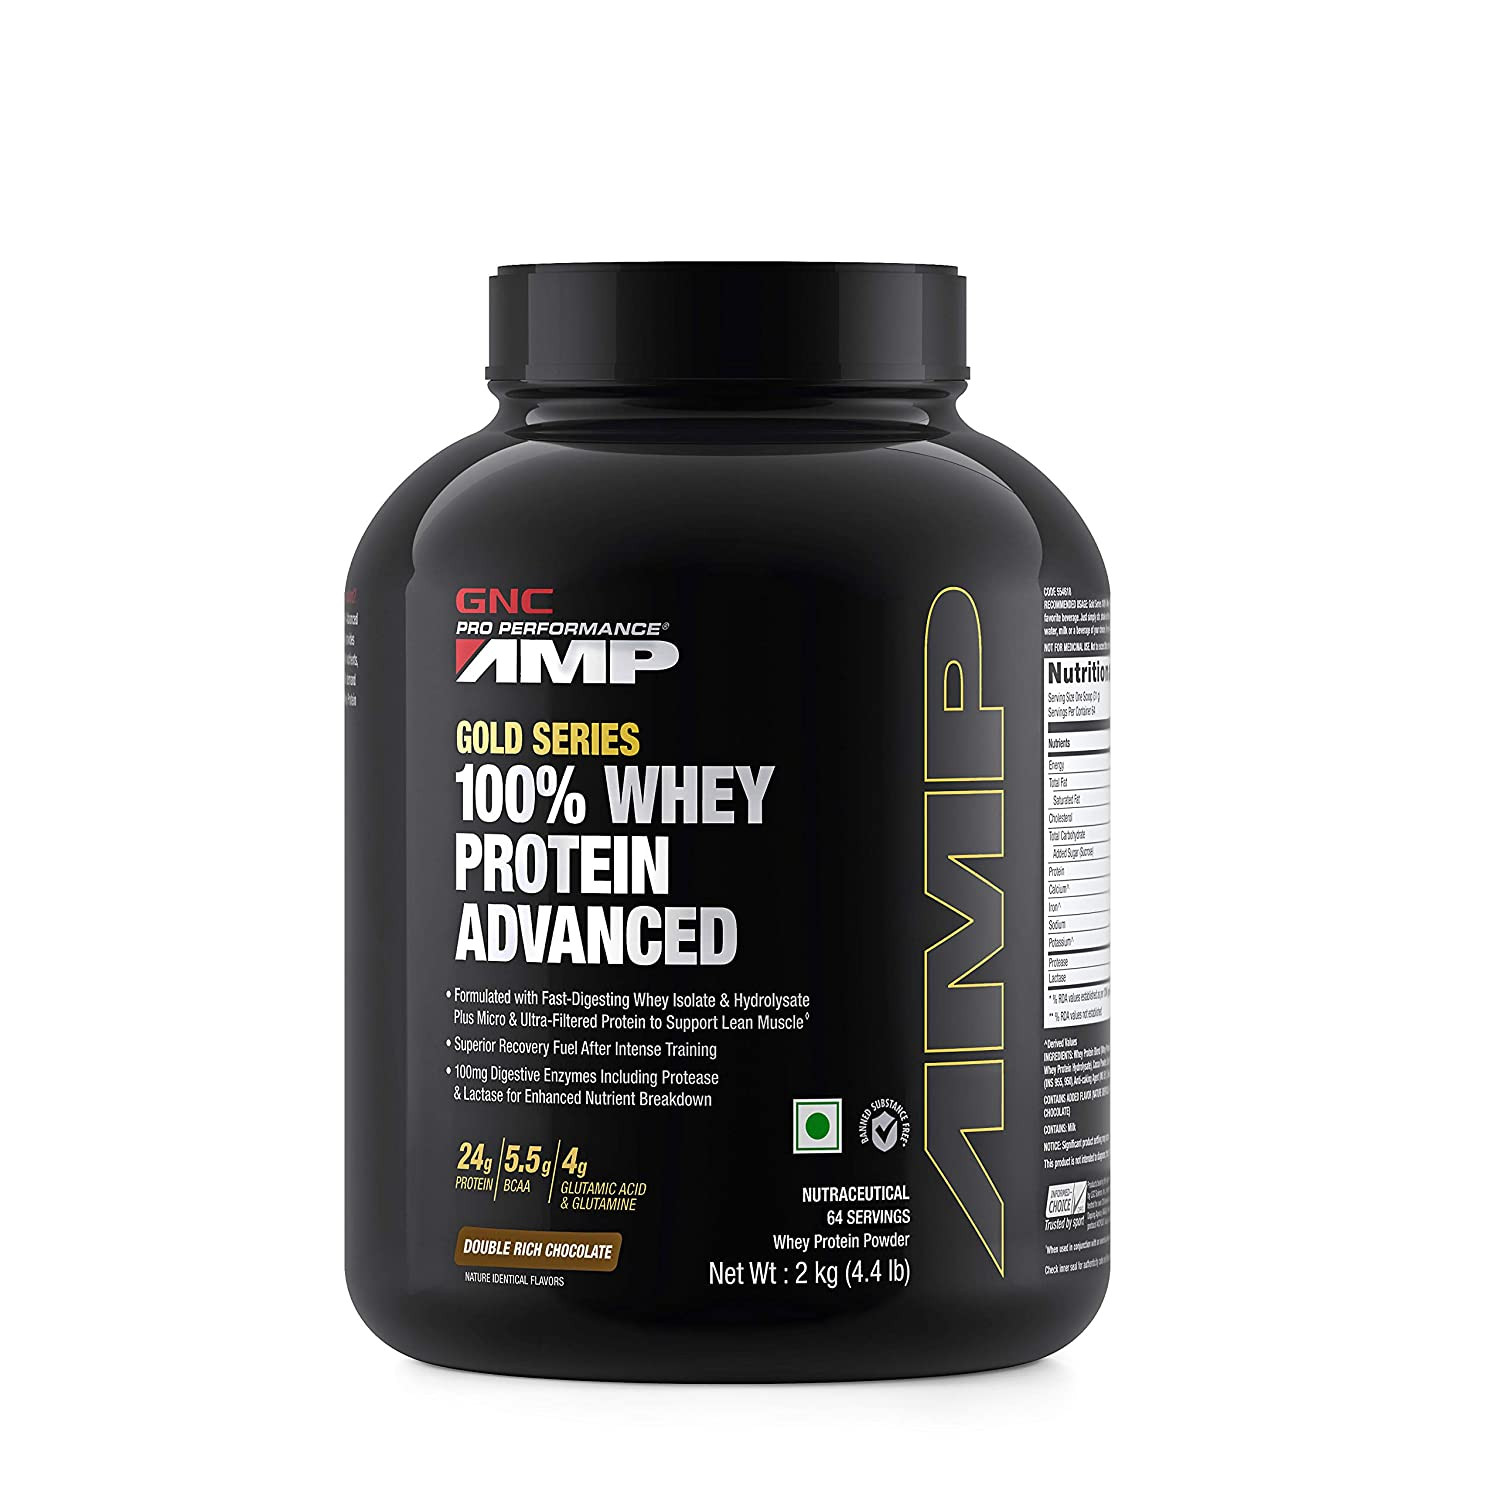 GNC Amp Gold Series 100% Whey Protein